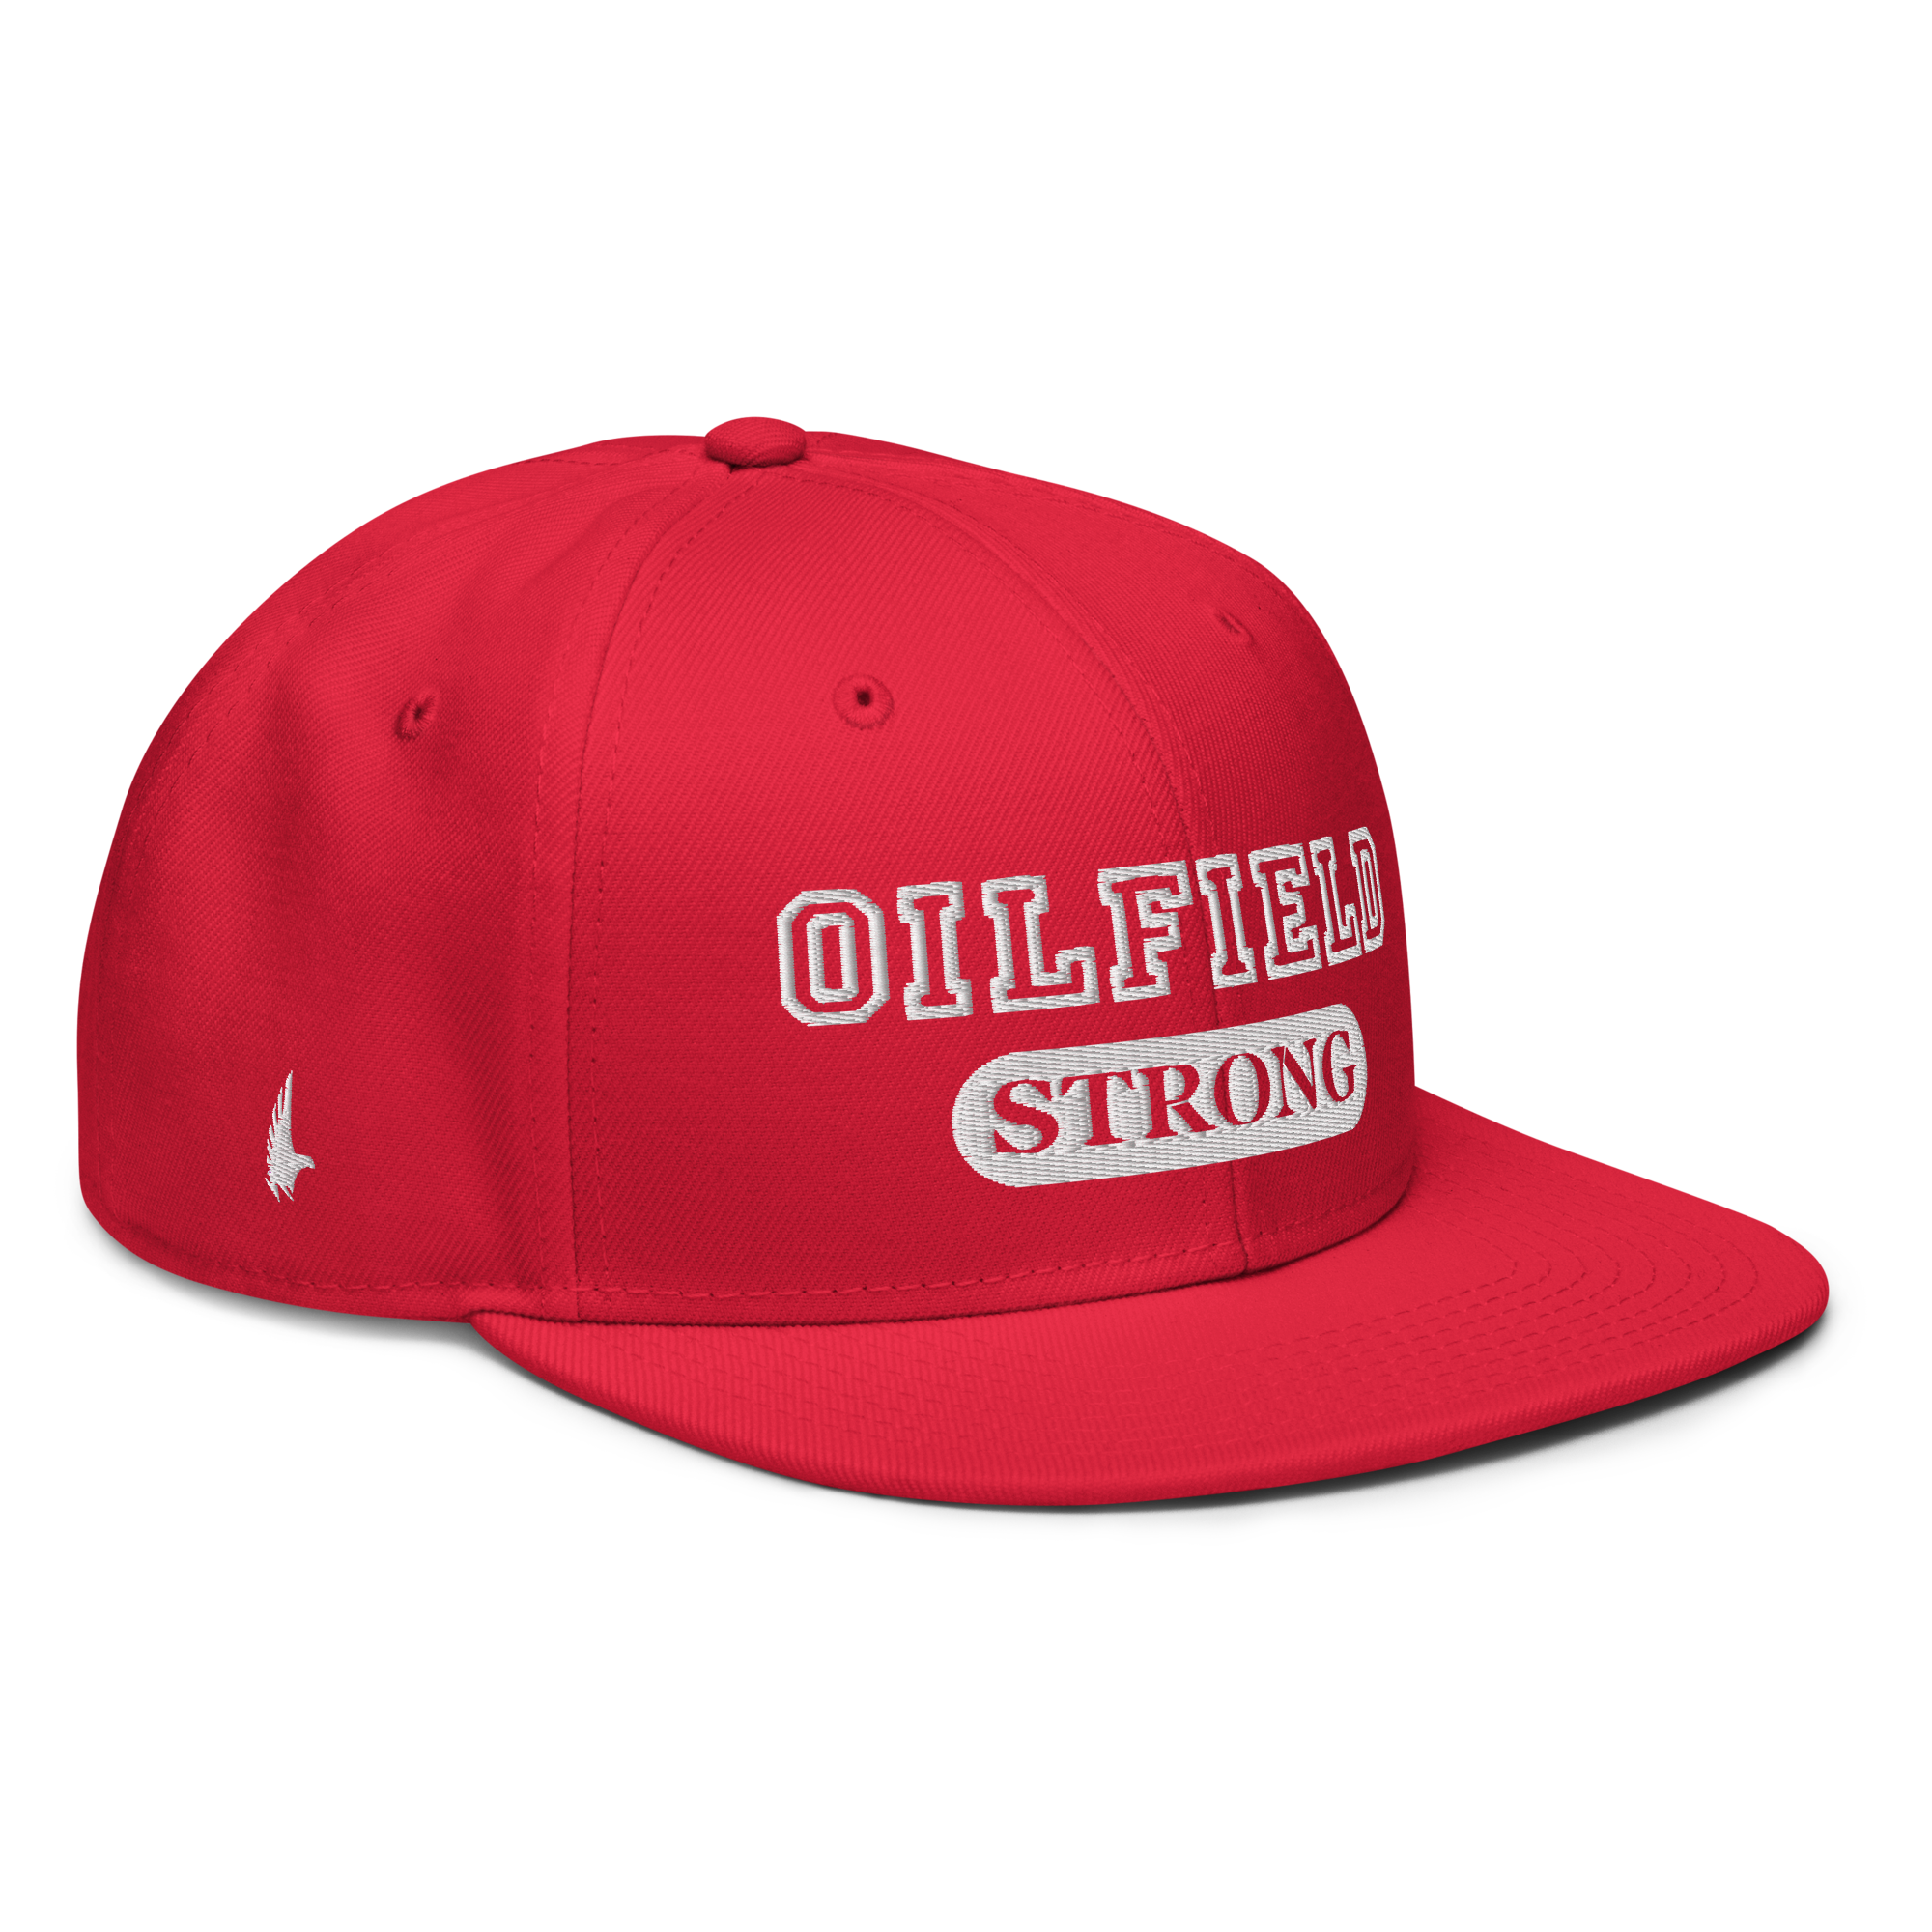 Oilfield Strong Snapback Hat - Red - Loyalty Vibes